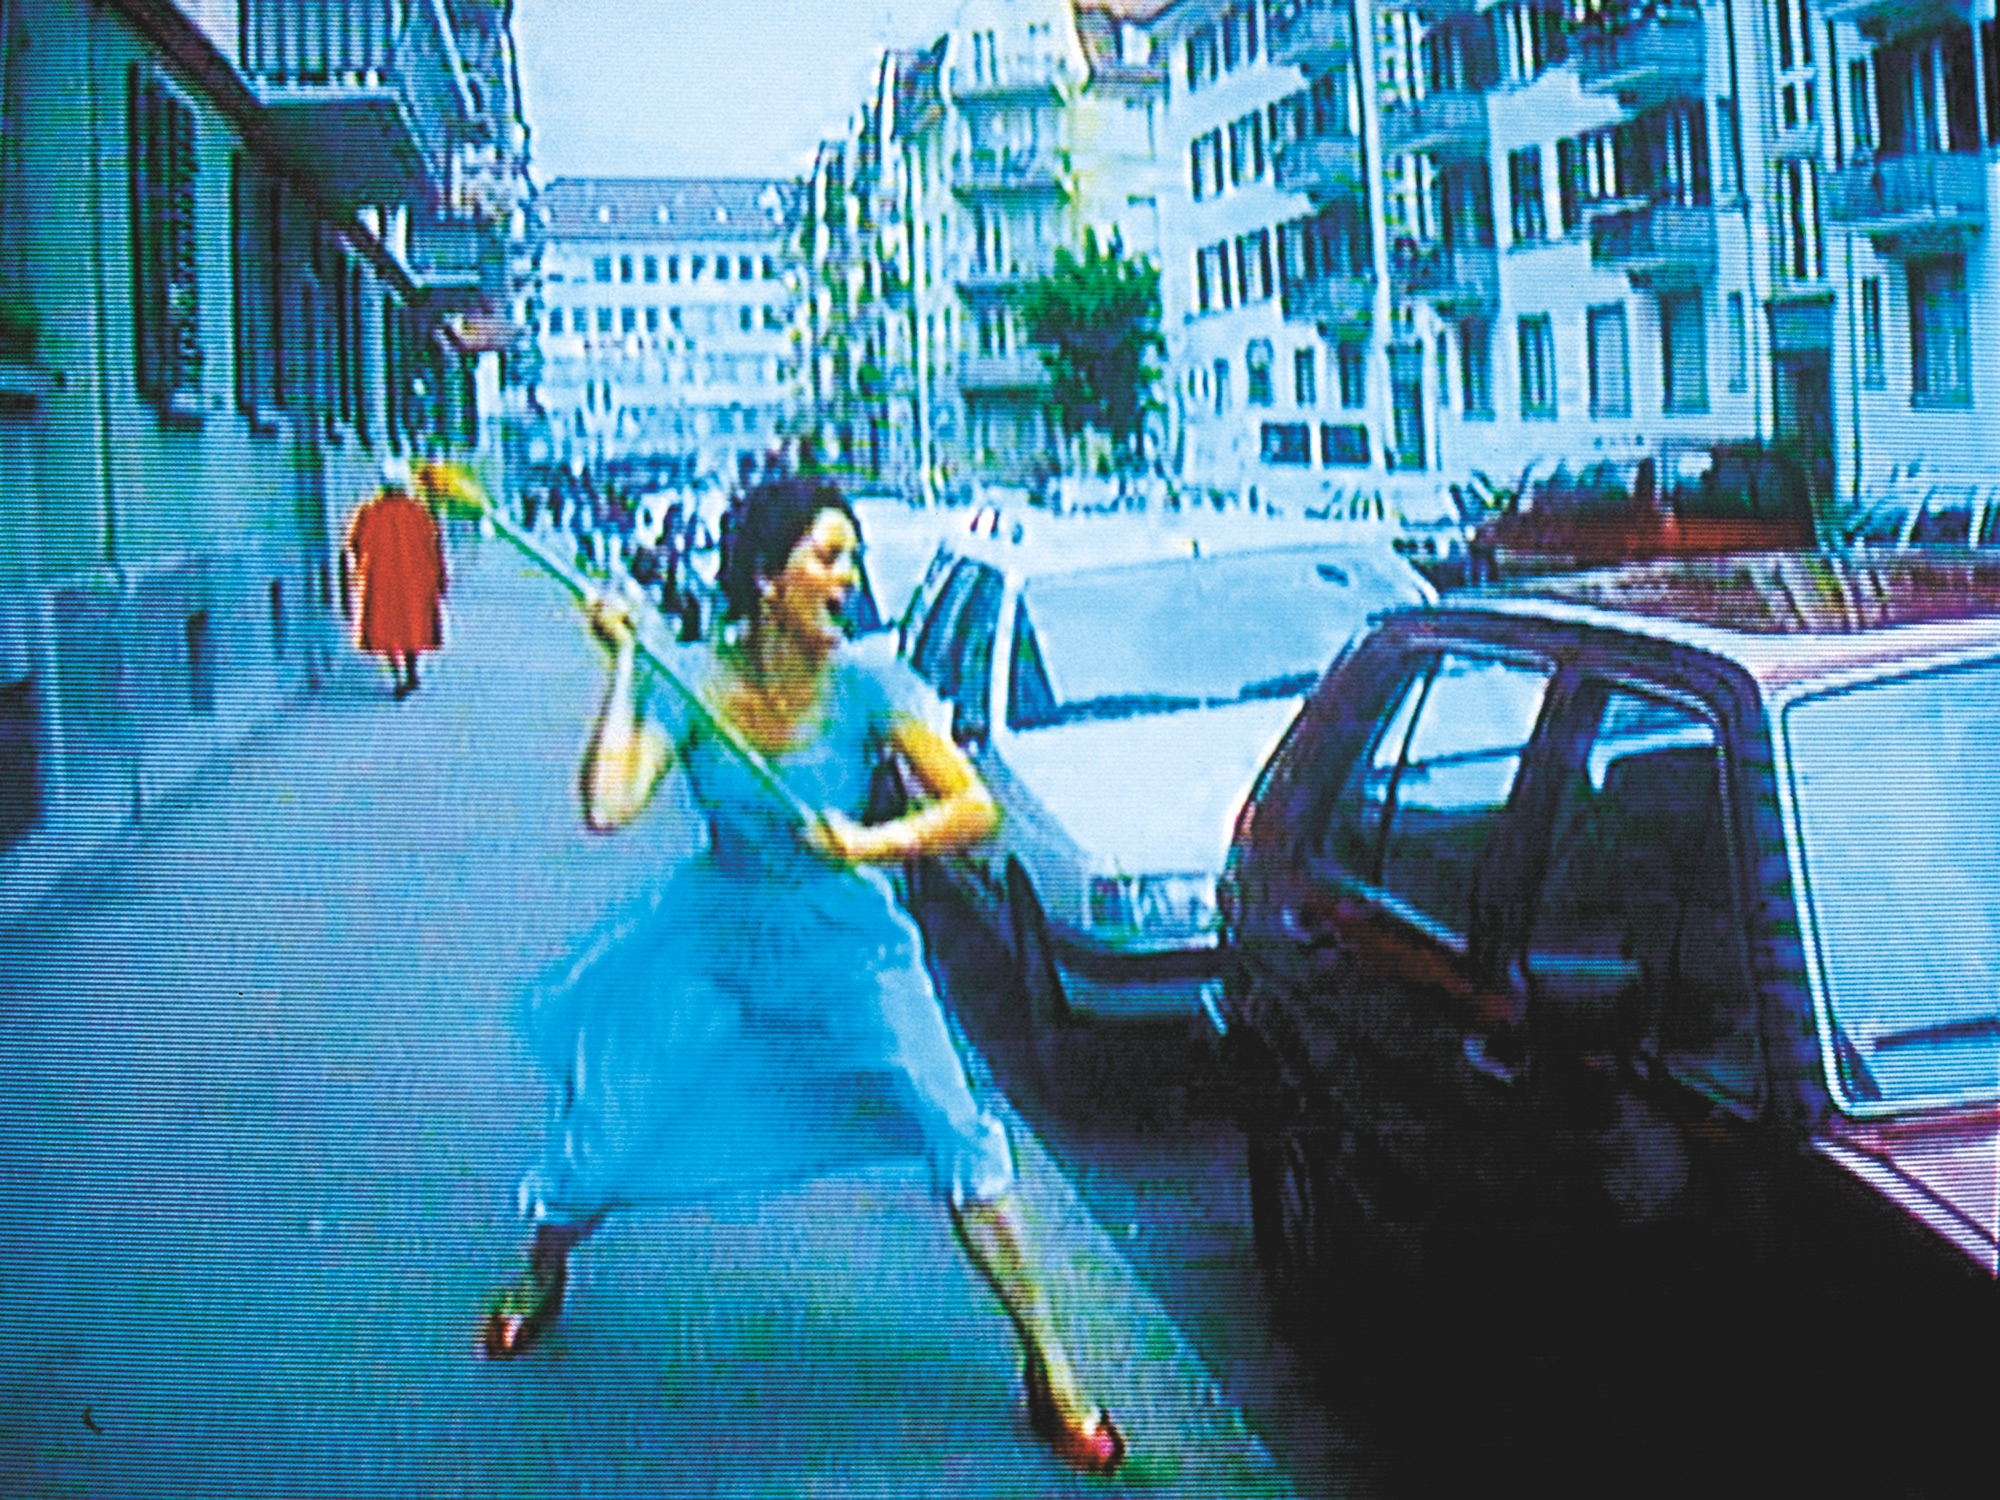 Ever is Over All, 1997, audio video installation by Pipilotti Rist (video still) © Pipilotti Rist. Courtesy the artist, Hauser & Wirth and Luhring Augustine